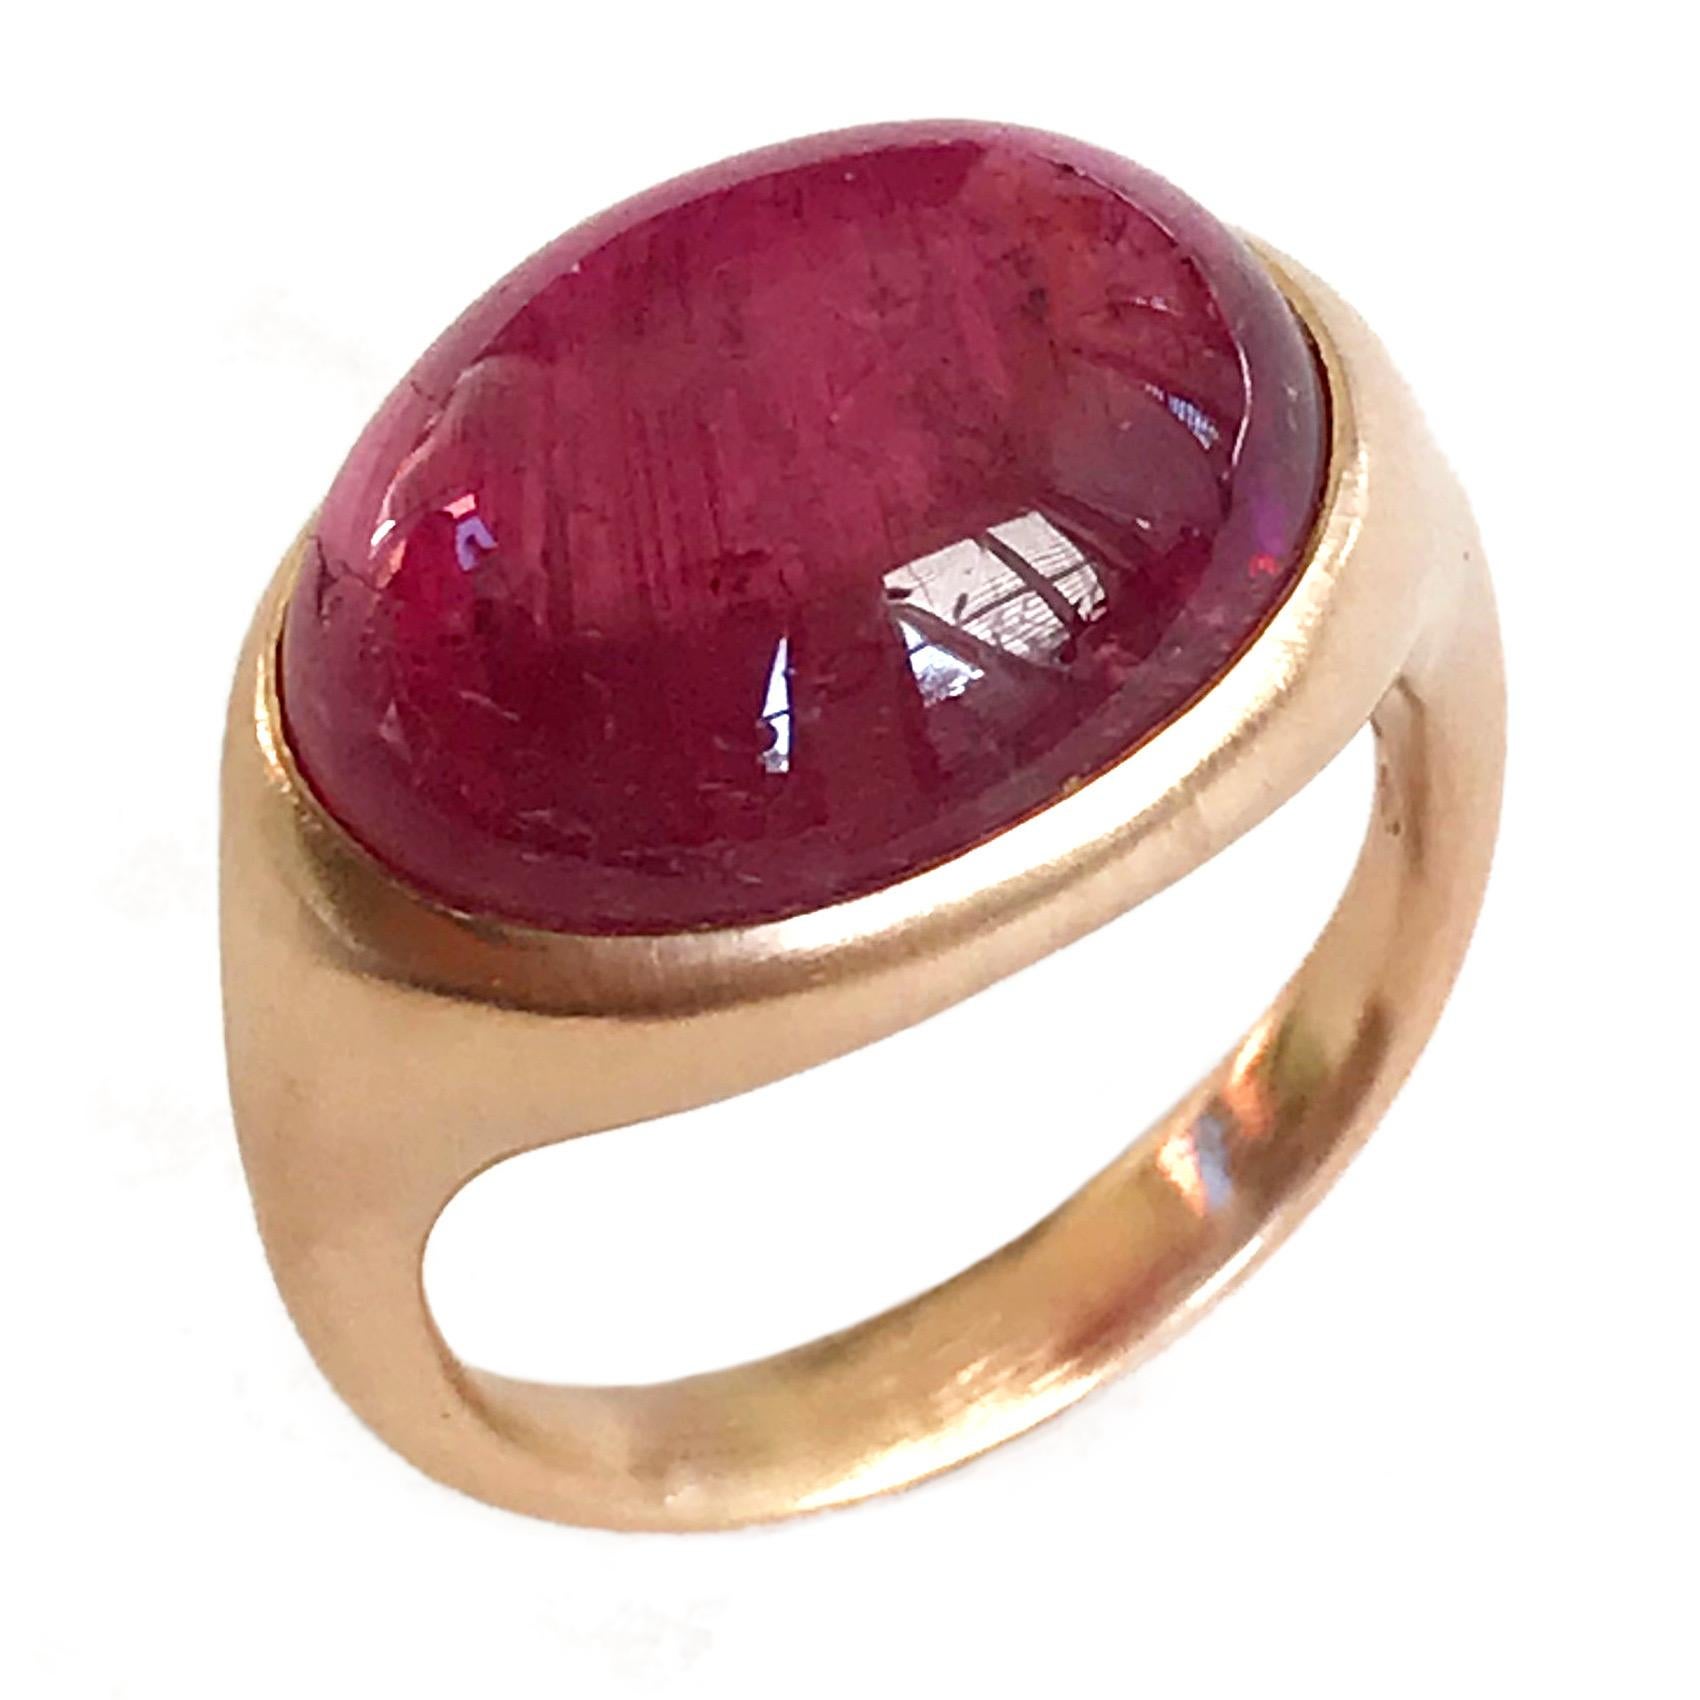 Dalben design  18k rose gold matte finishing ring with a 11,94 carat bezel-set oval cabochon cut red tourmaline . 
Ring size 7 1/4 USA - EU 55 re-sizable to most finger sizes. 
Bezel stone dimensions :
height 13,4 mm
width 17,6 mm
The ring has been